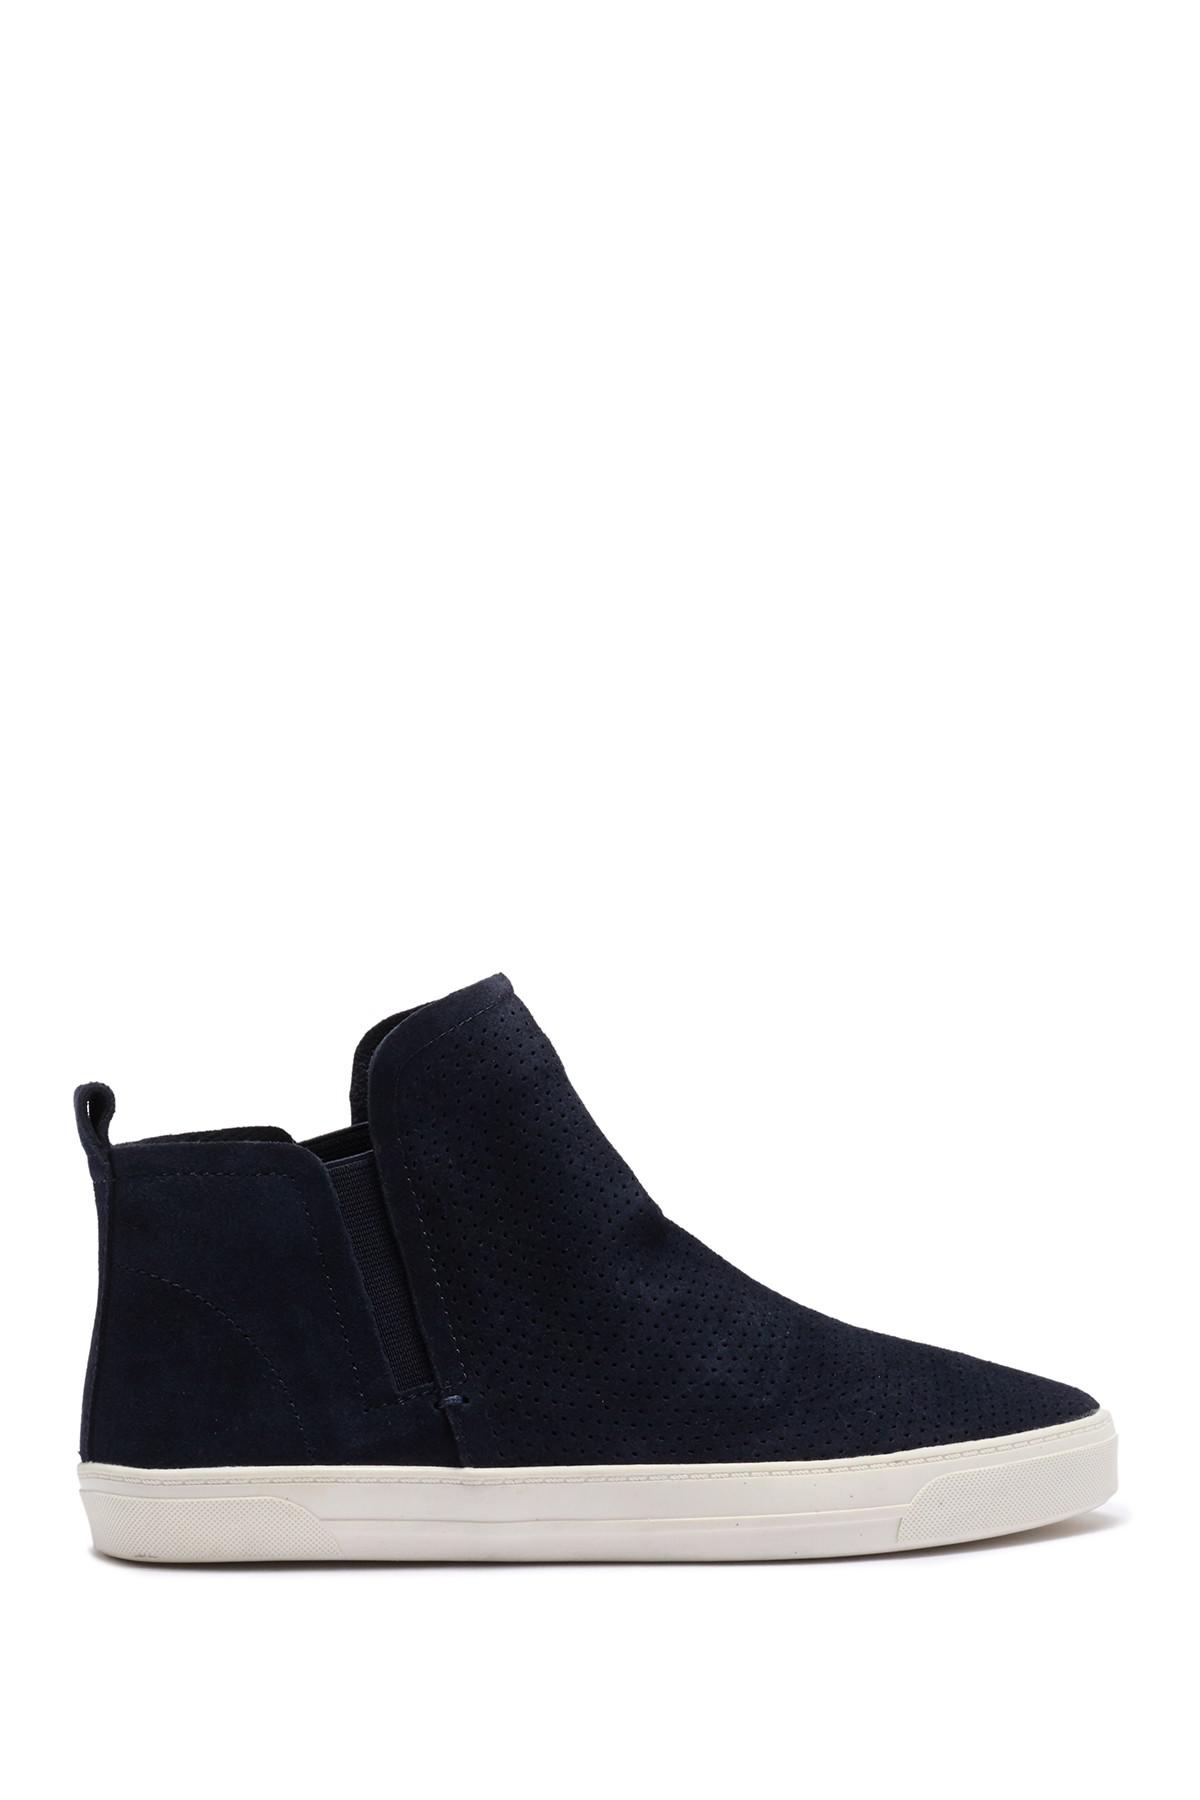 dolce vita xane perforated suede sneaker